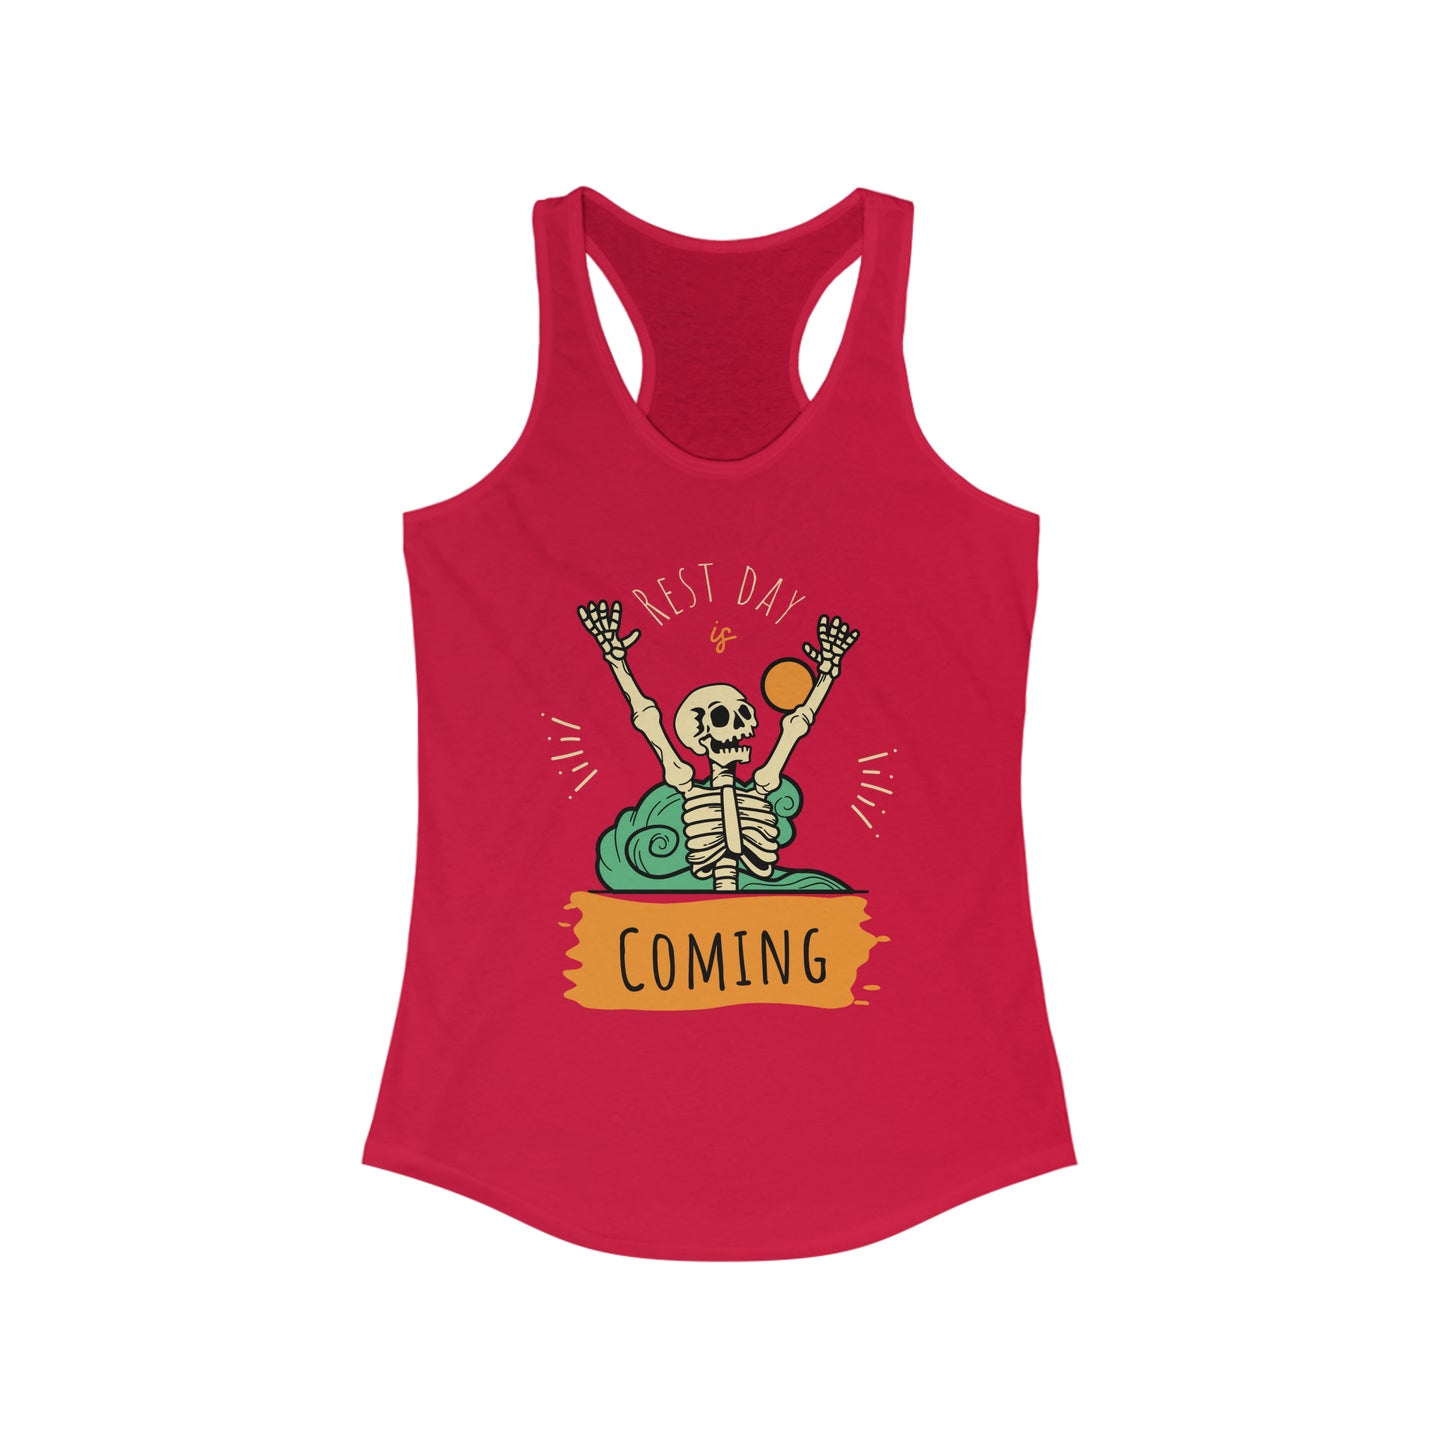 Rest Day Is Coming Women's Racerback Tank